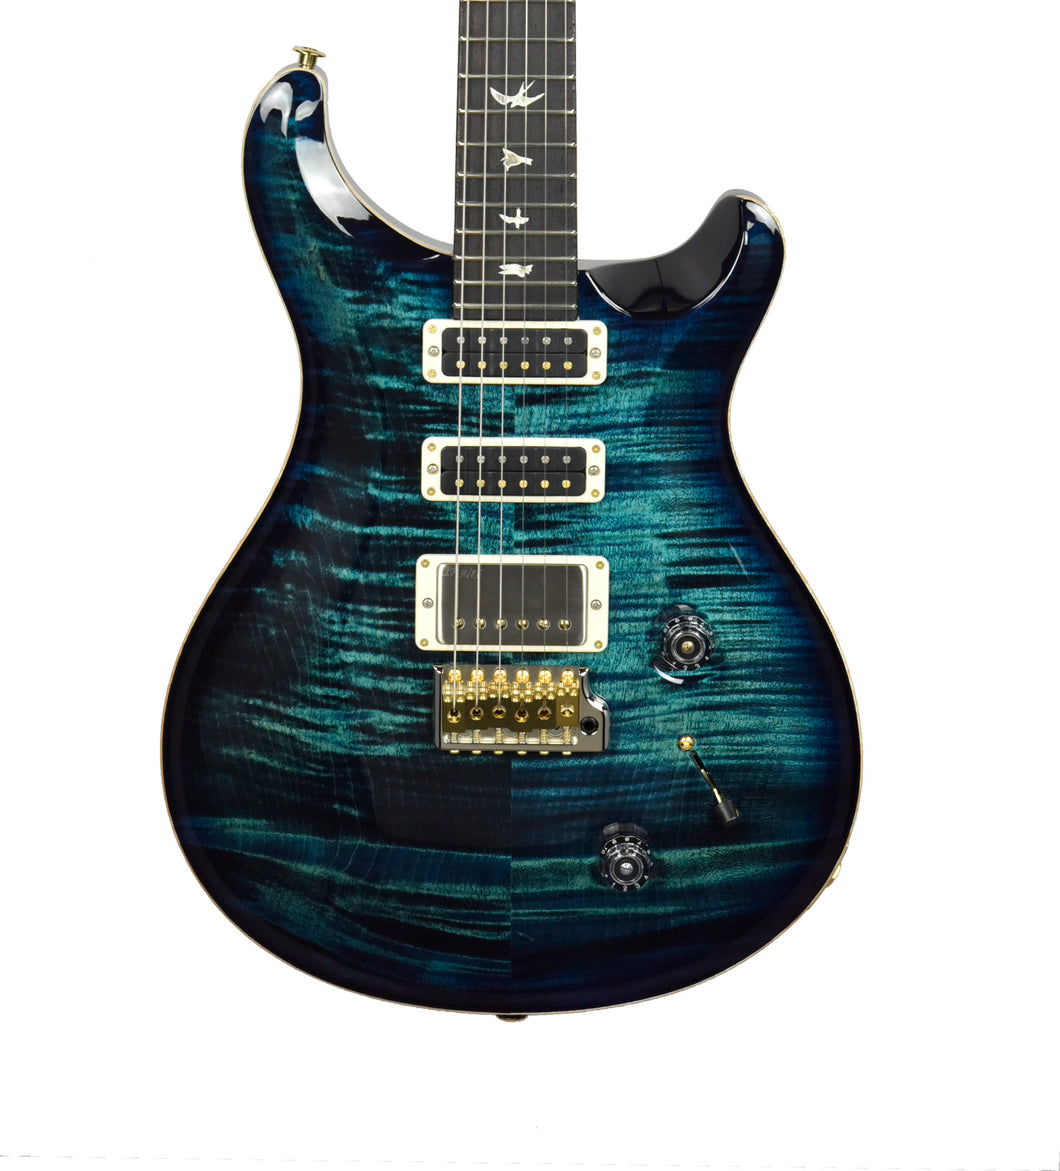 PRS Studio 22 Electric Guitar in Cobalt Blue 230365340 - The Music Gallery